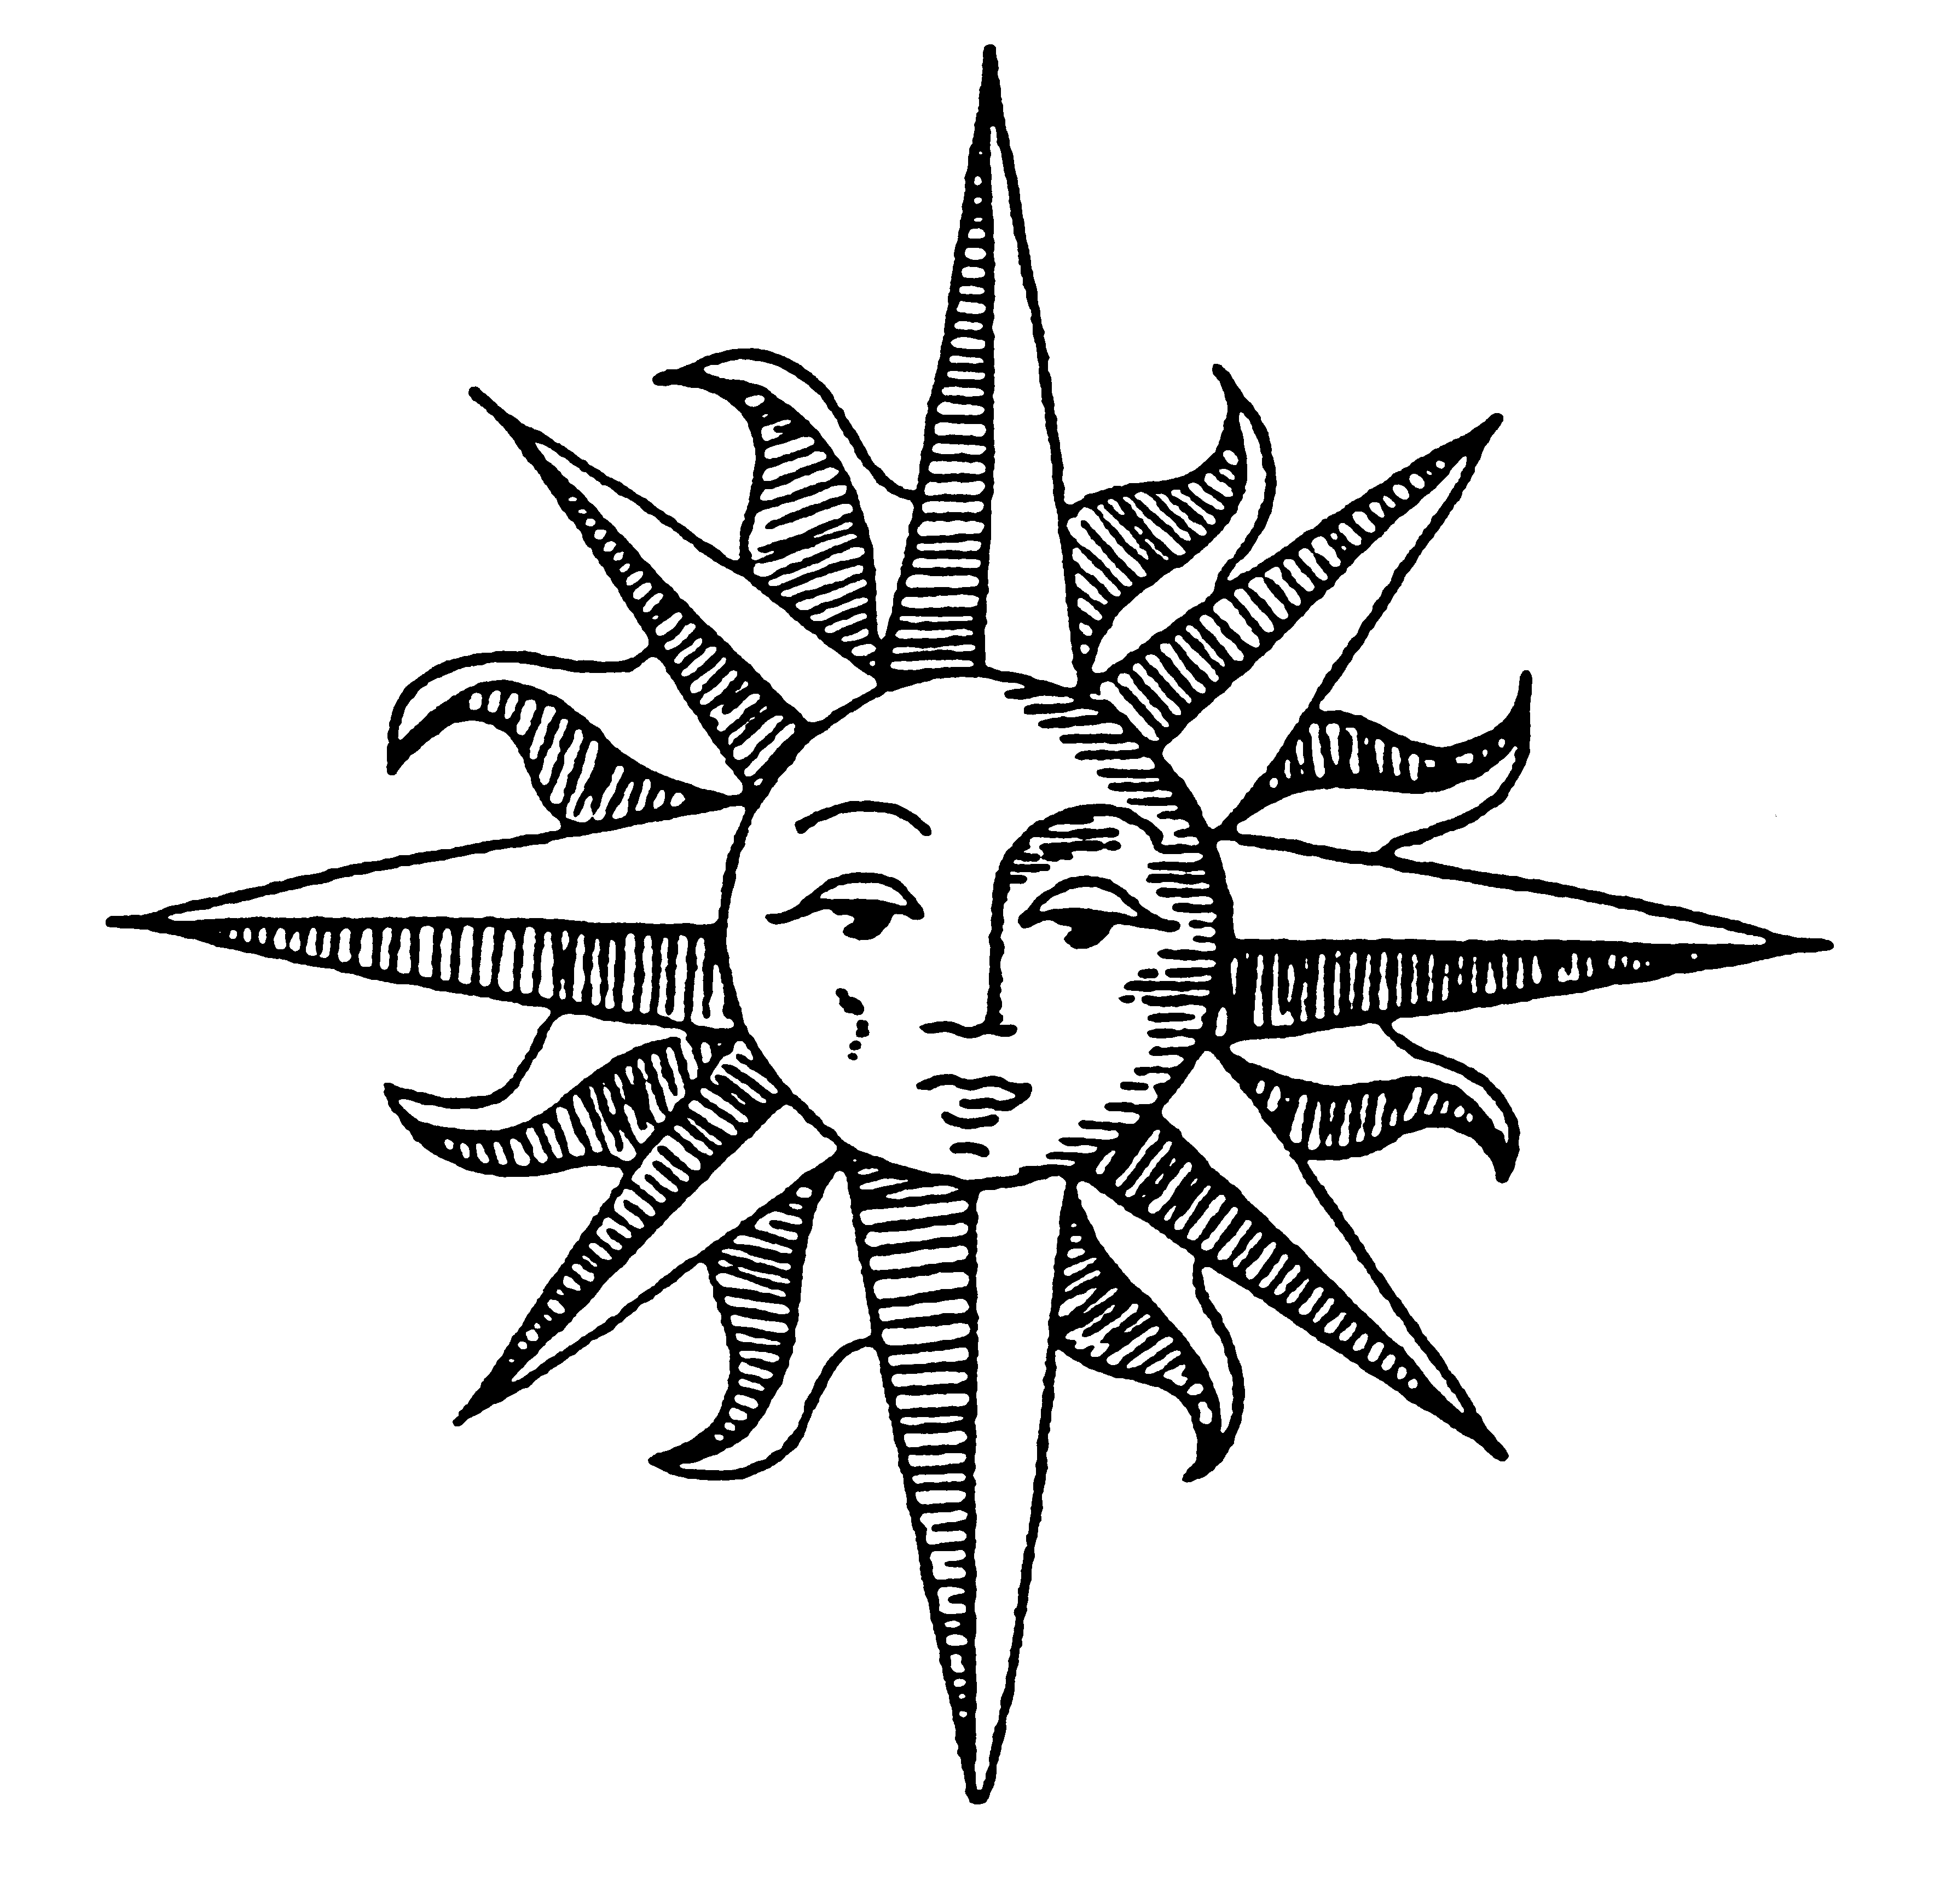 Free Sun Drawings, Download Free Sun Drawings png images, Free ClipArts